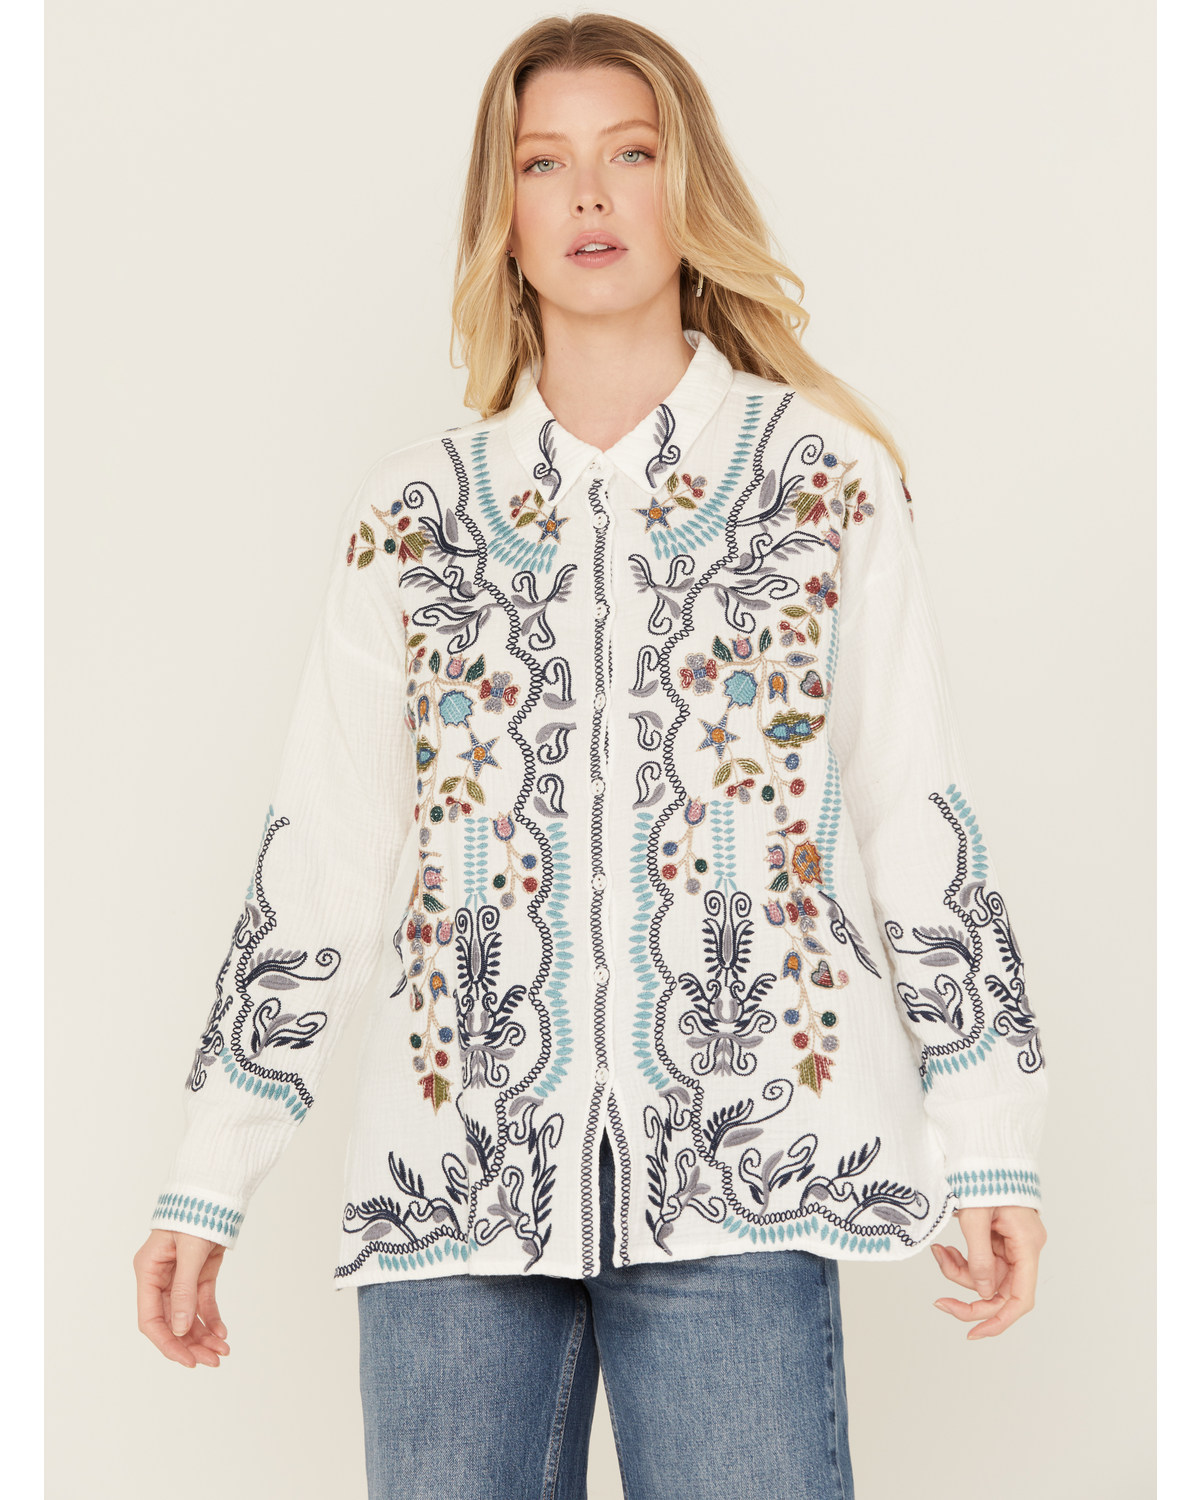 Johnny Was Women's Embroidered Long Sleeve Button-Down Shirt